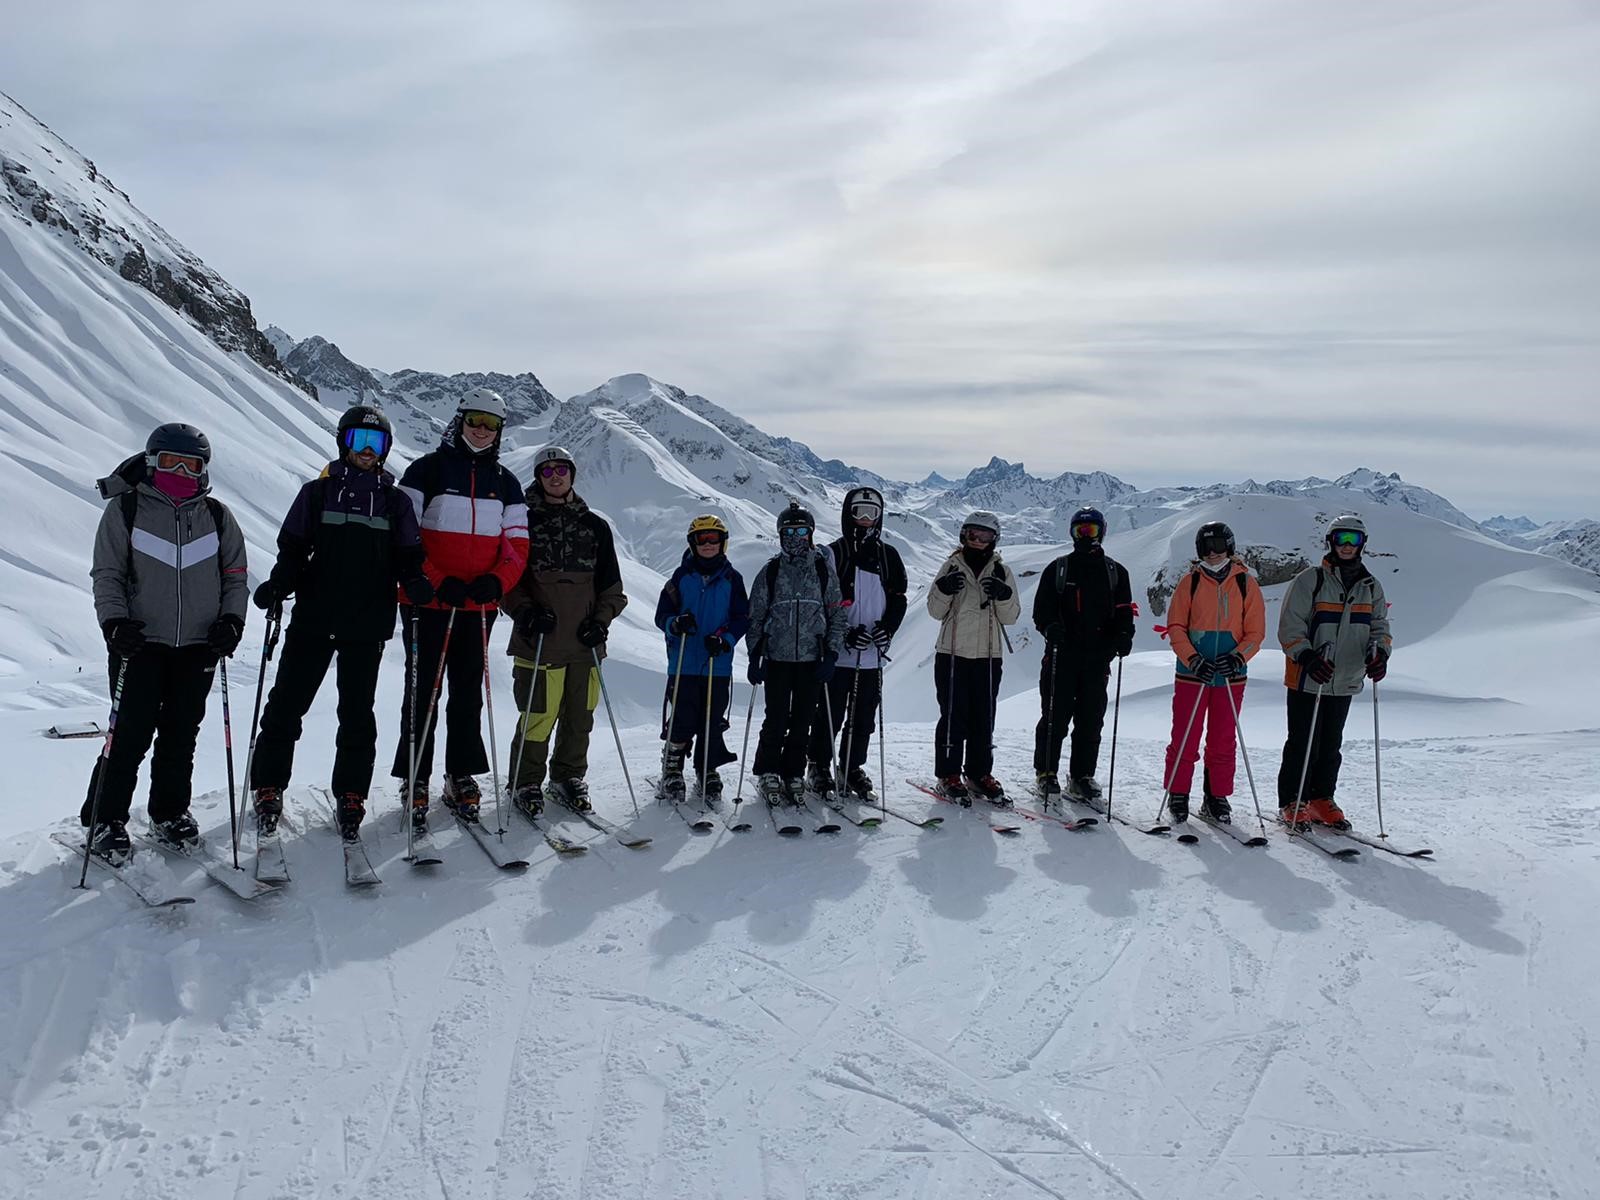 Students and staff lined up on the slopes